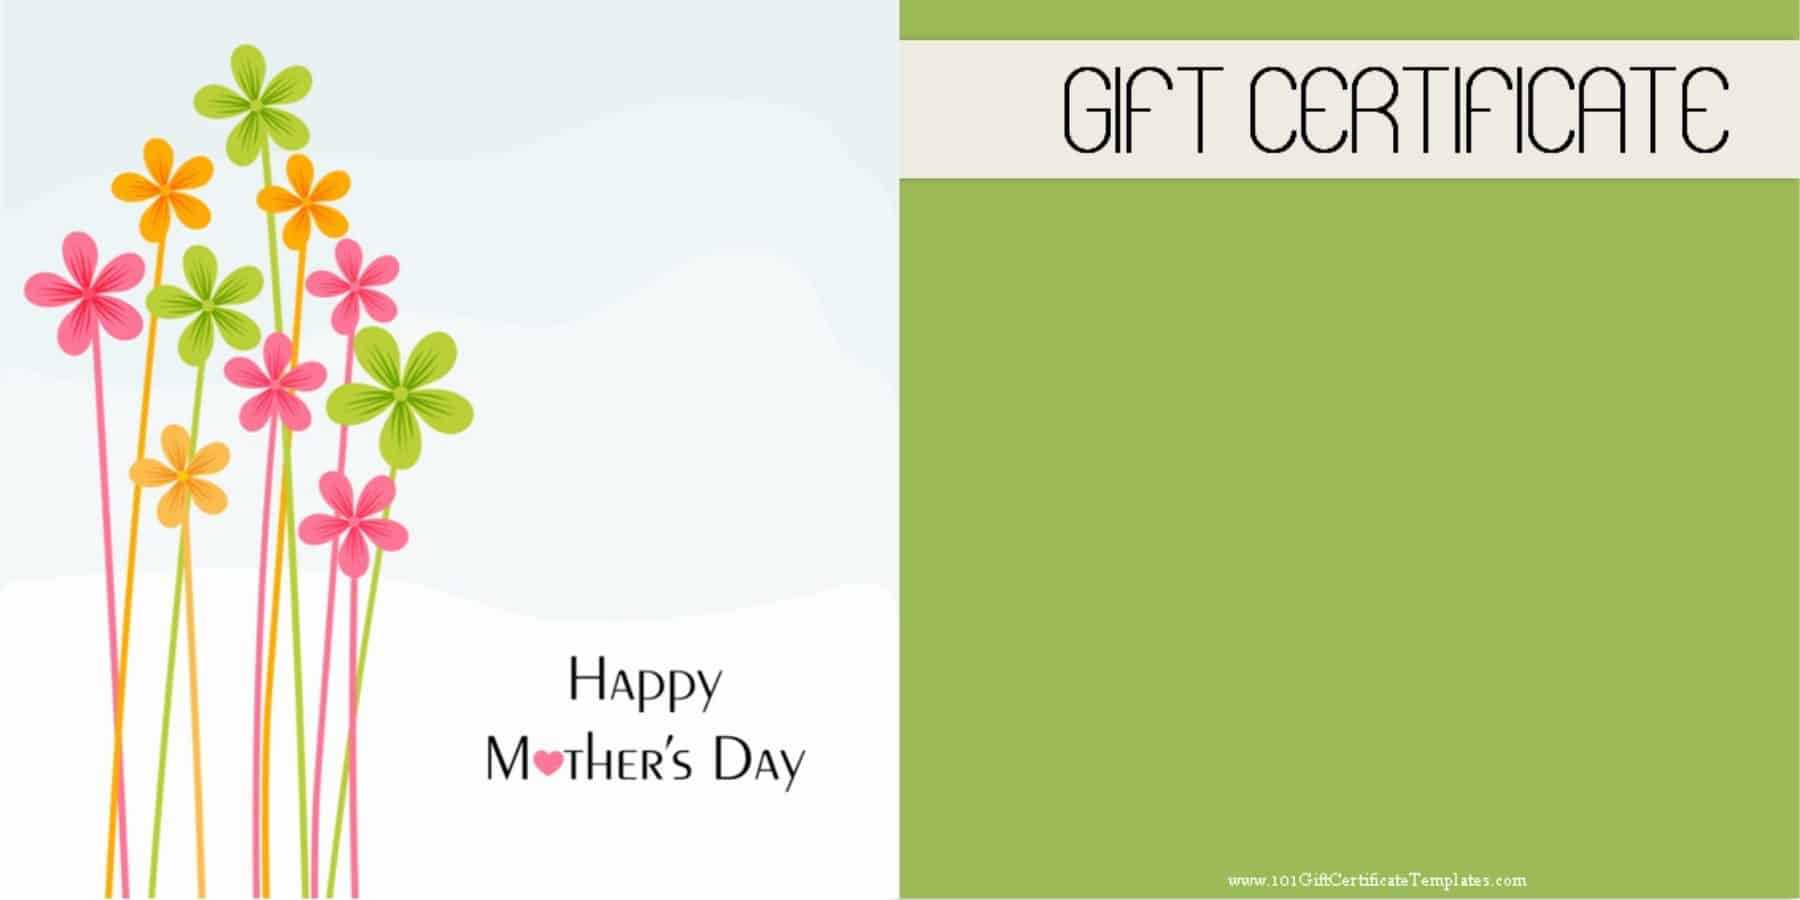 Mother's Day Gift Certificate Templates For Spa Day Gift Certificate Template